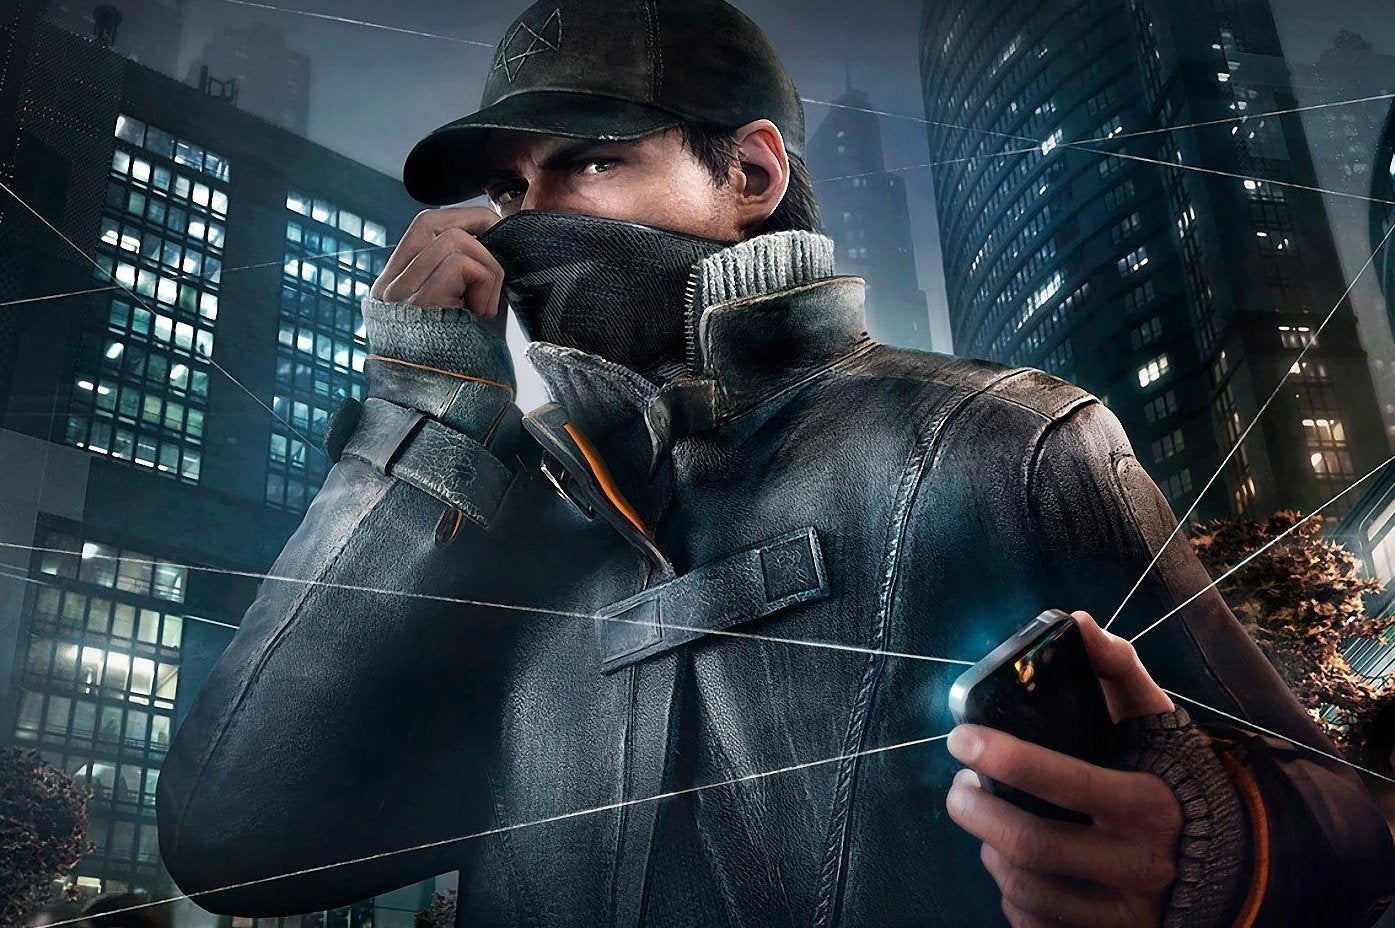 Watch Dogs PS3: has last-gen hardware had its day? 